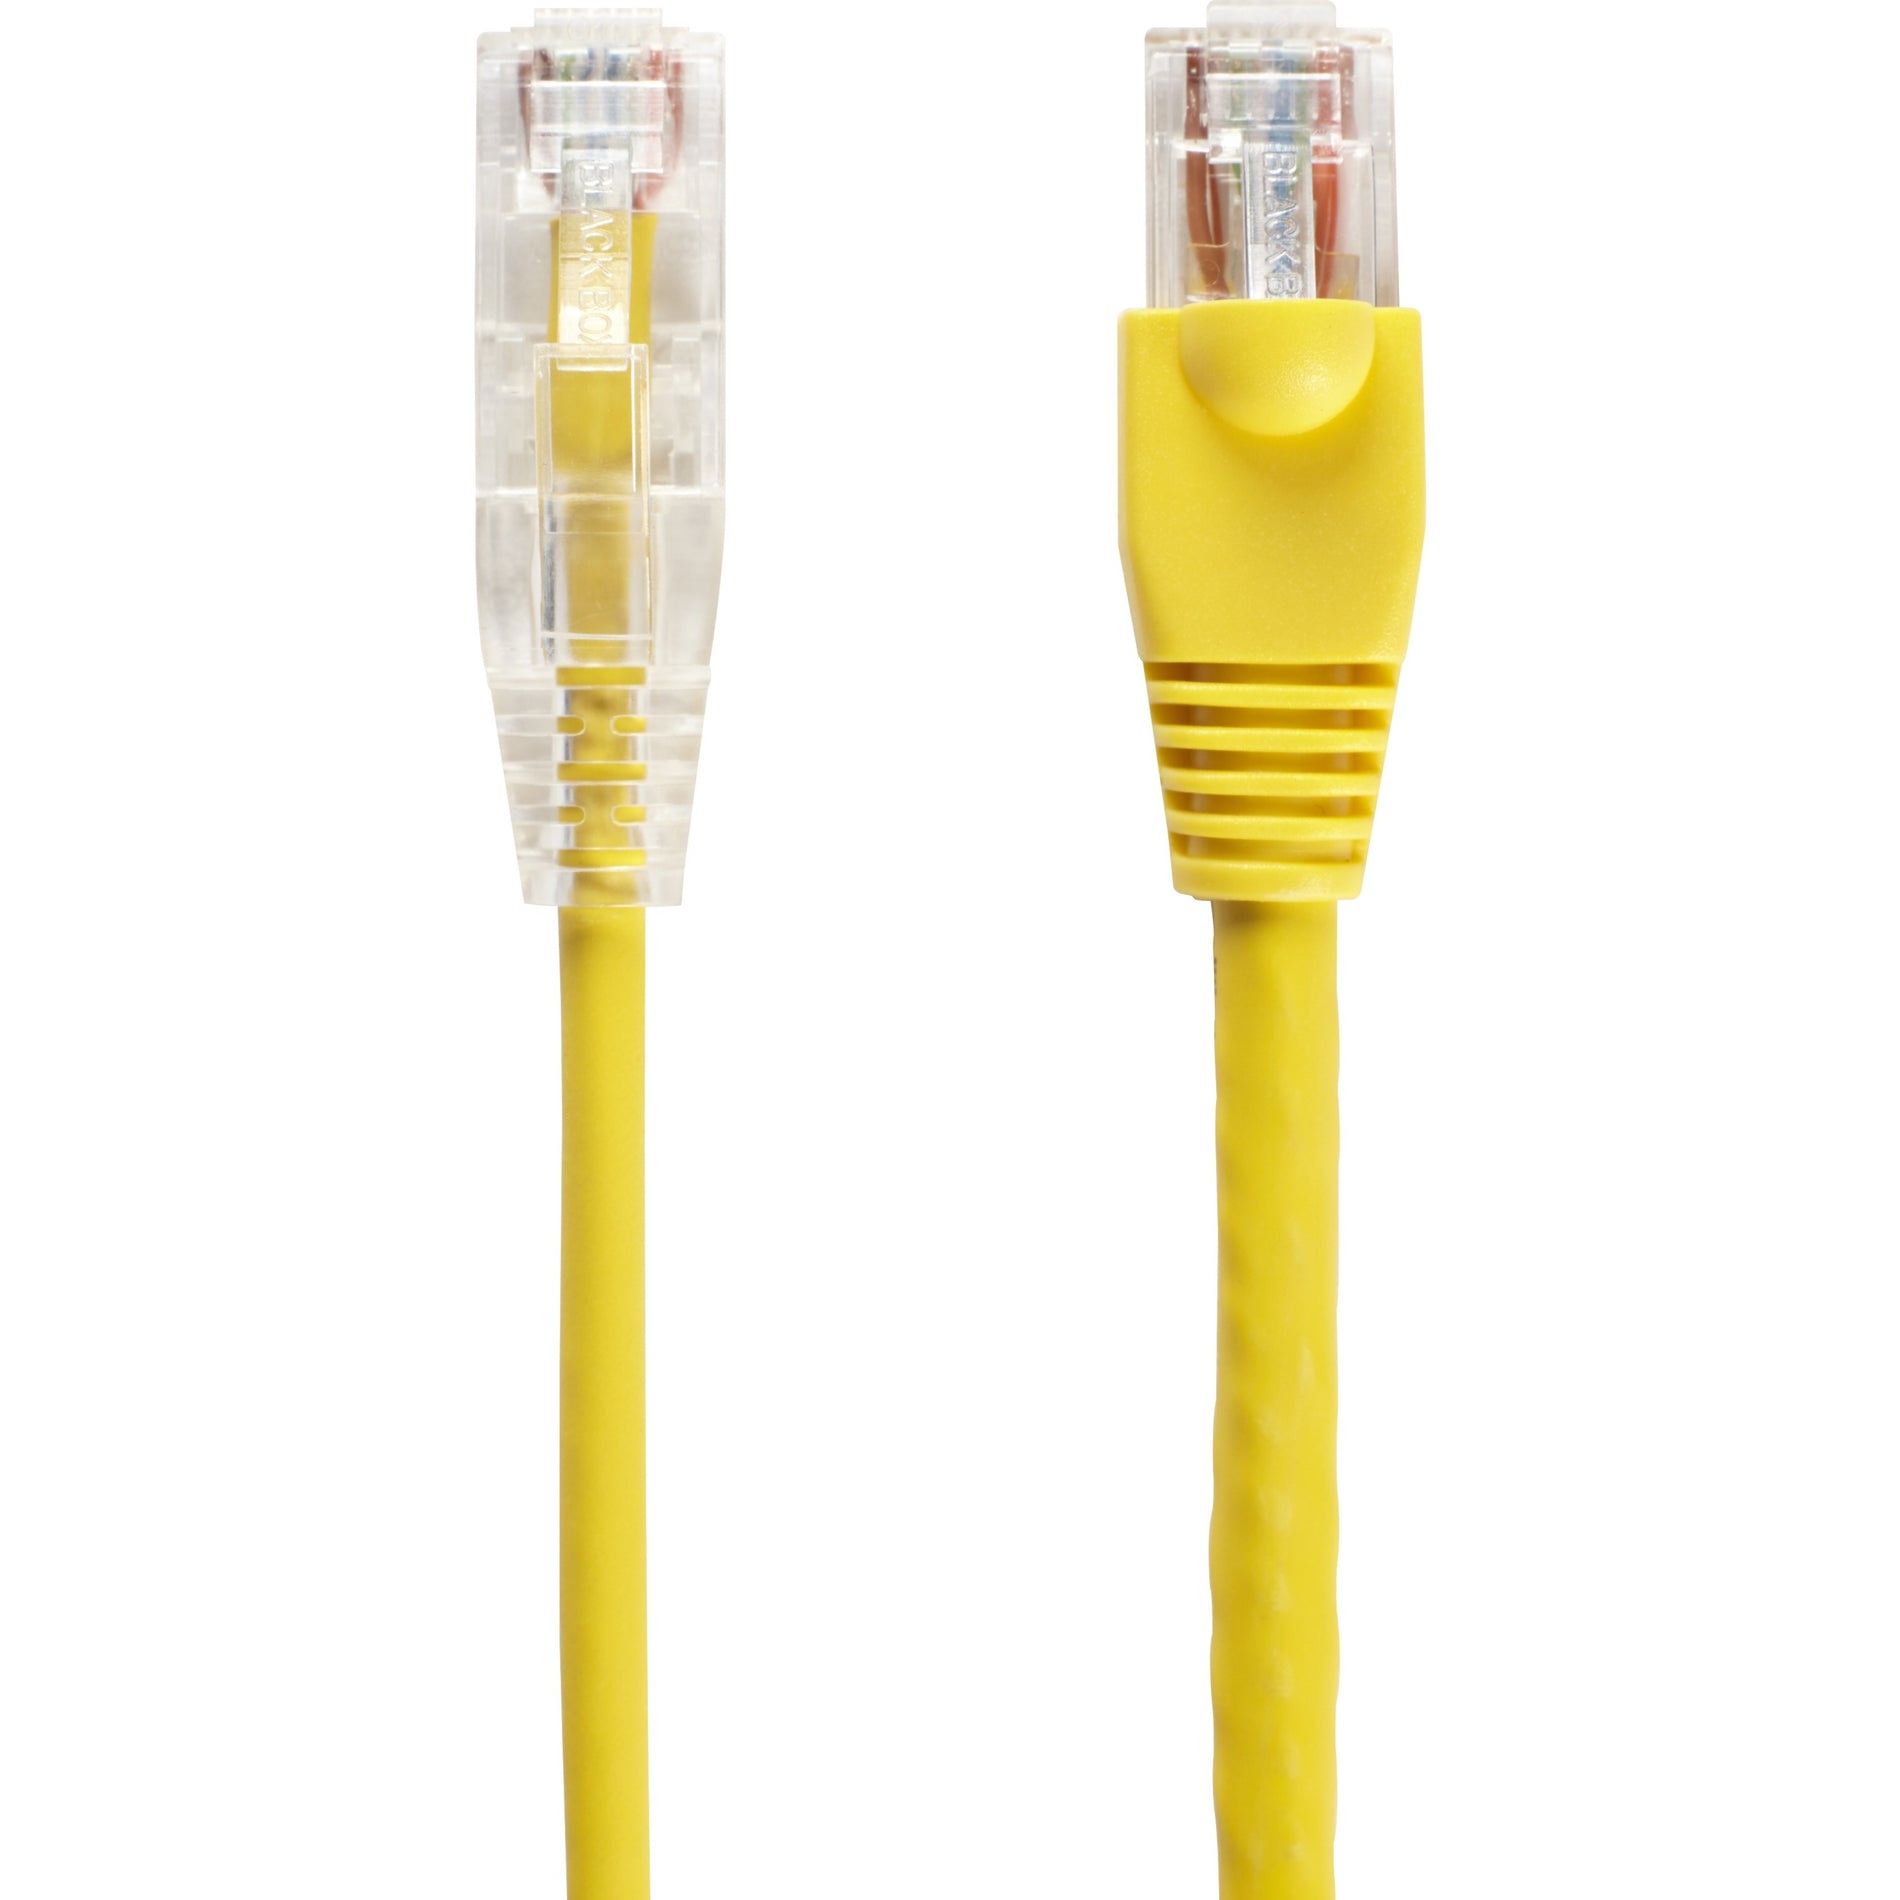 Black Box C6APC28-YL-15 Slim-Net Cat.6a UTP Patch Network Cable, 15 ft, Snagless Boot, 10 Gbit/s Data Transfer Rate, Yellow